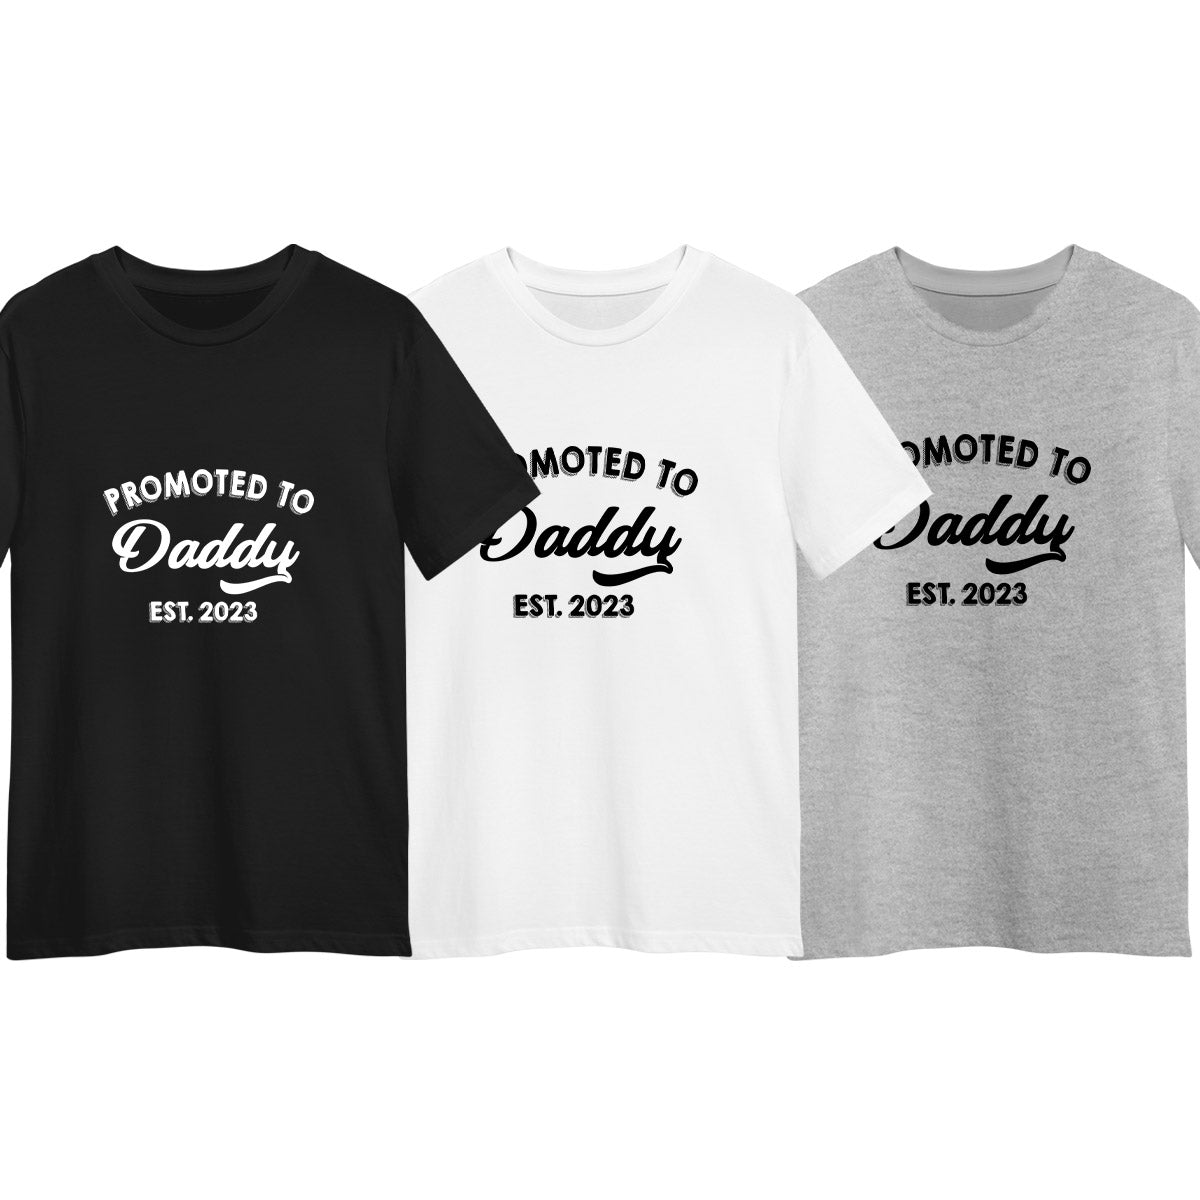 Promoted to Daddy 2023 T-Shirt 